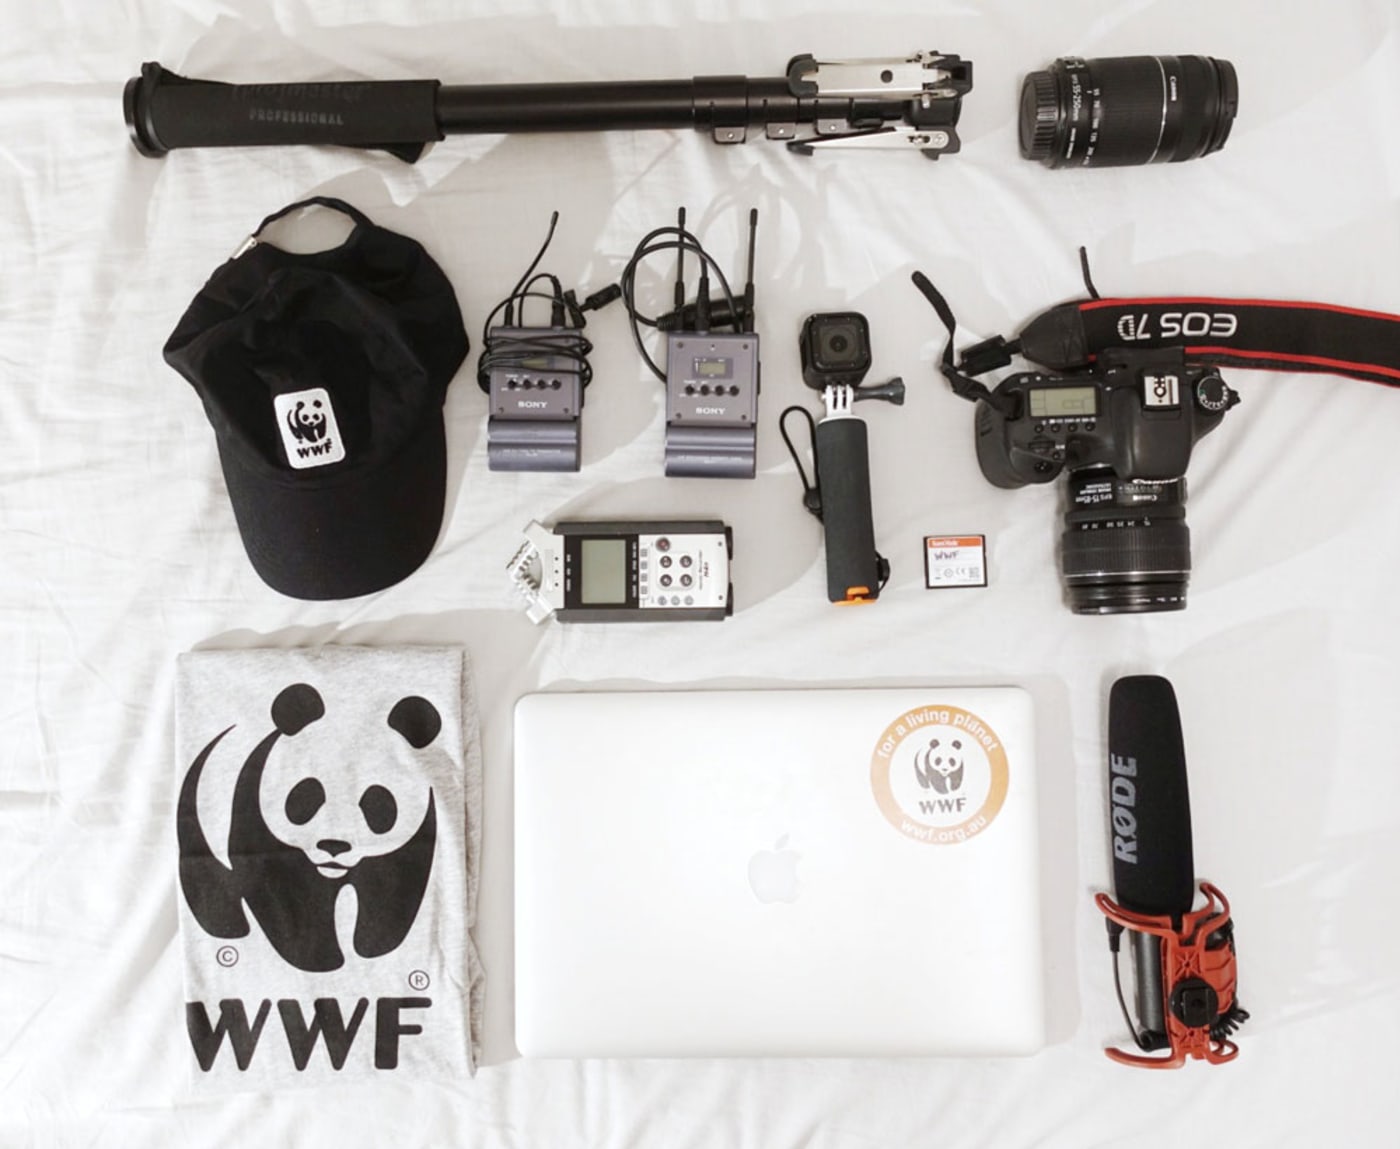 Content production field kit flatlay